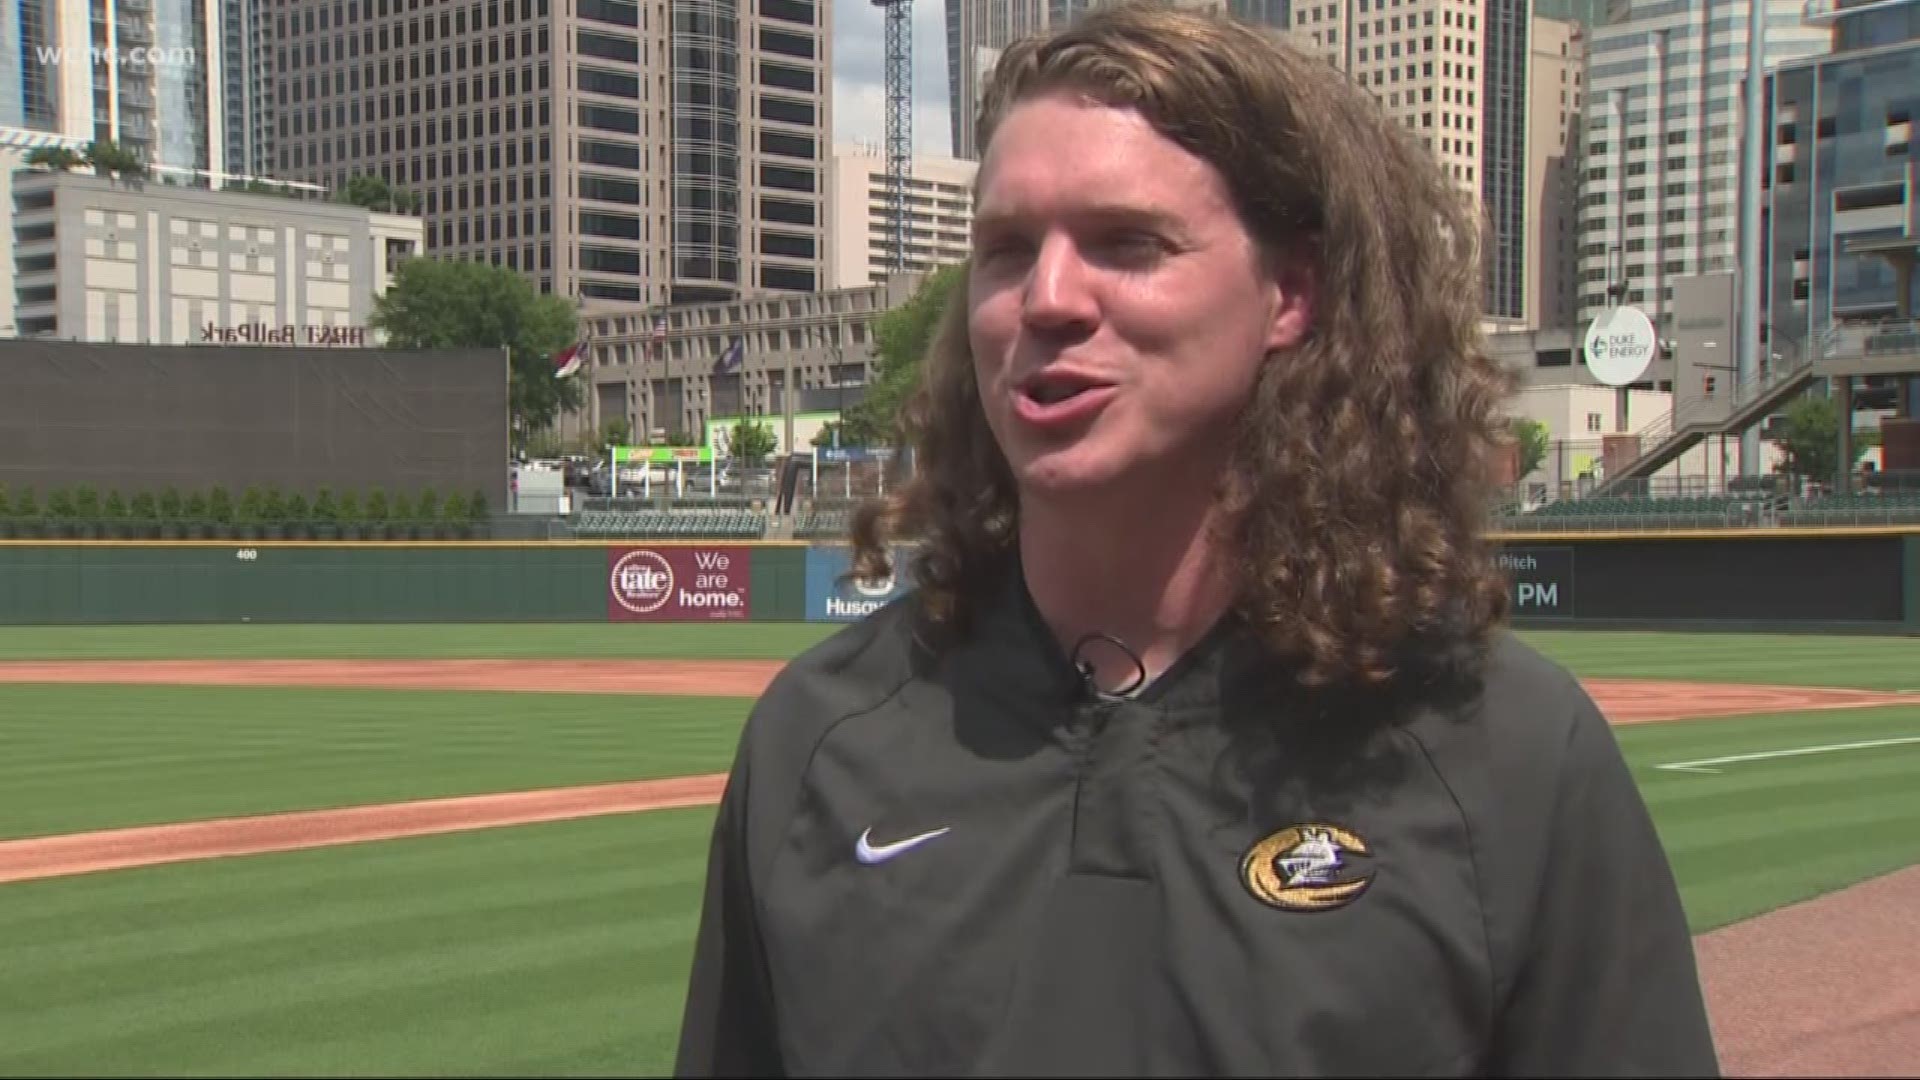 A Charlotte Knights staffer is donating his long locks to charity to help make wigs for kids battling cancer.